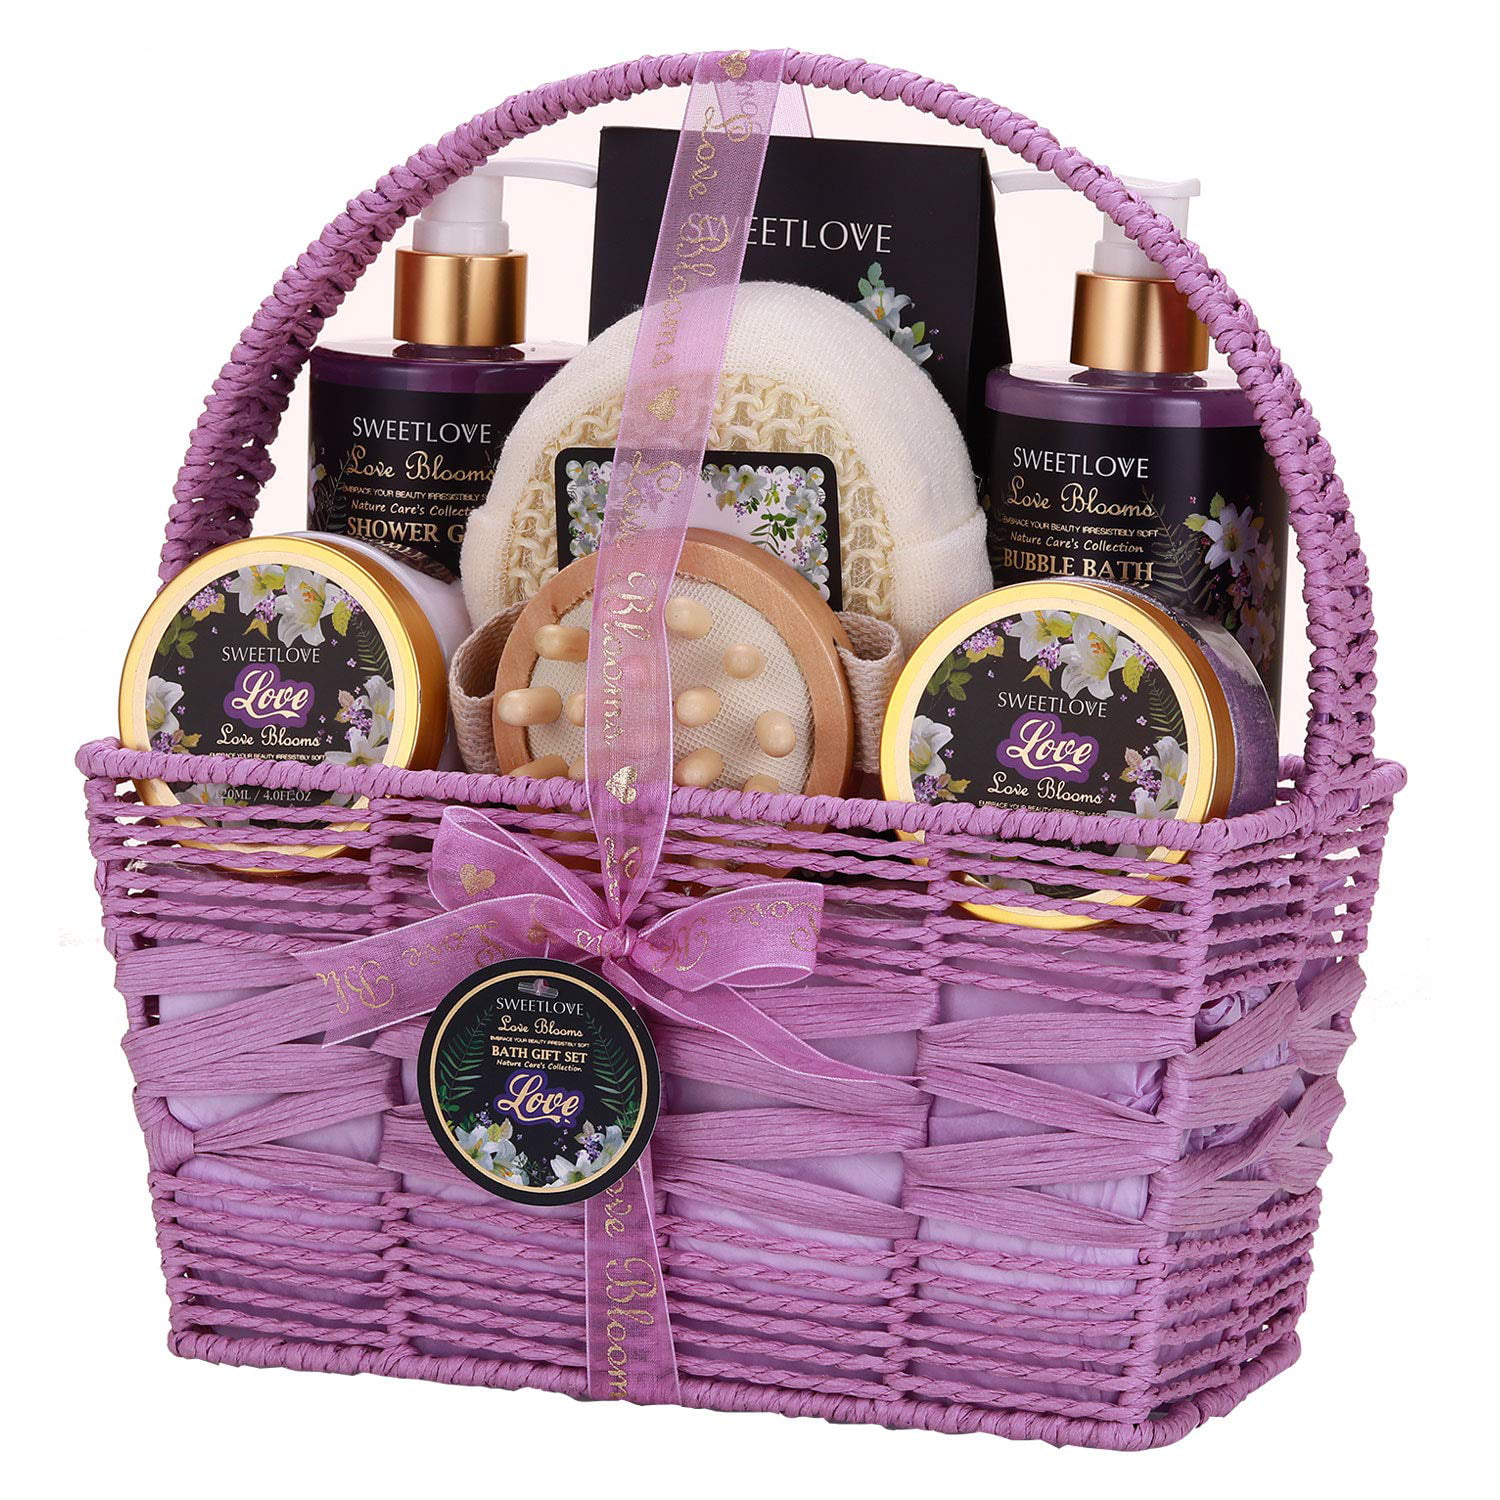 Spa Gift Basket for Women, Bath and Body Gift Set for her, Luxury 8